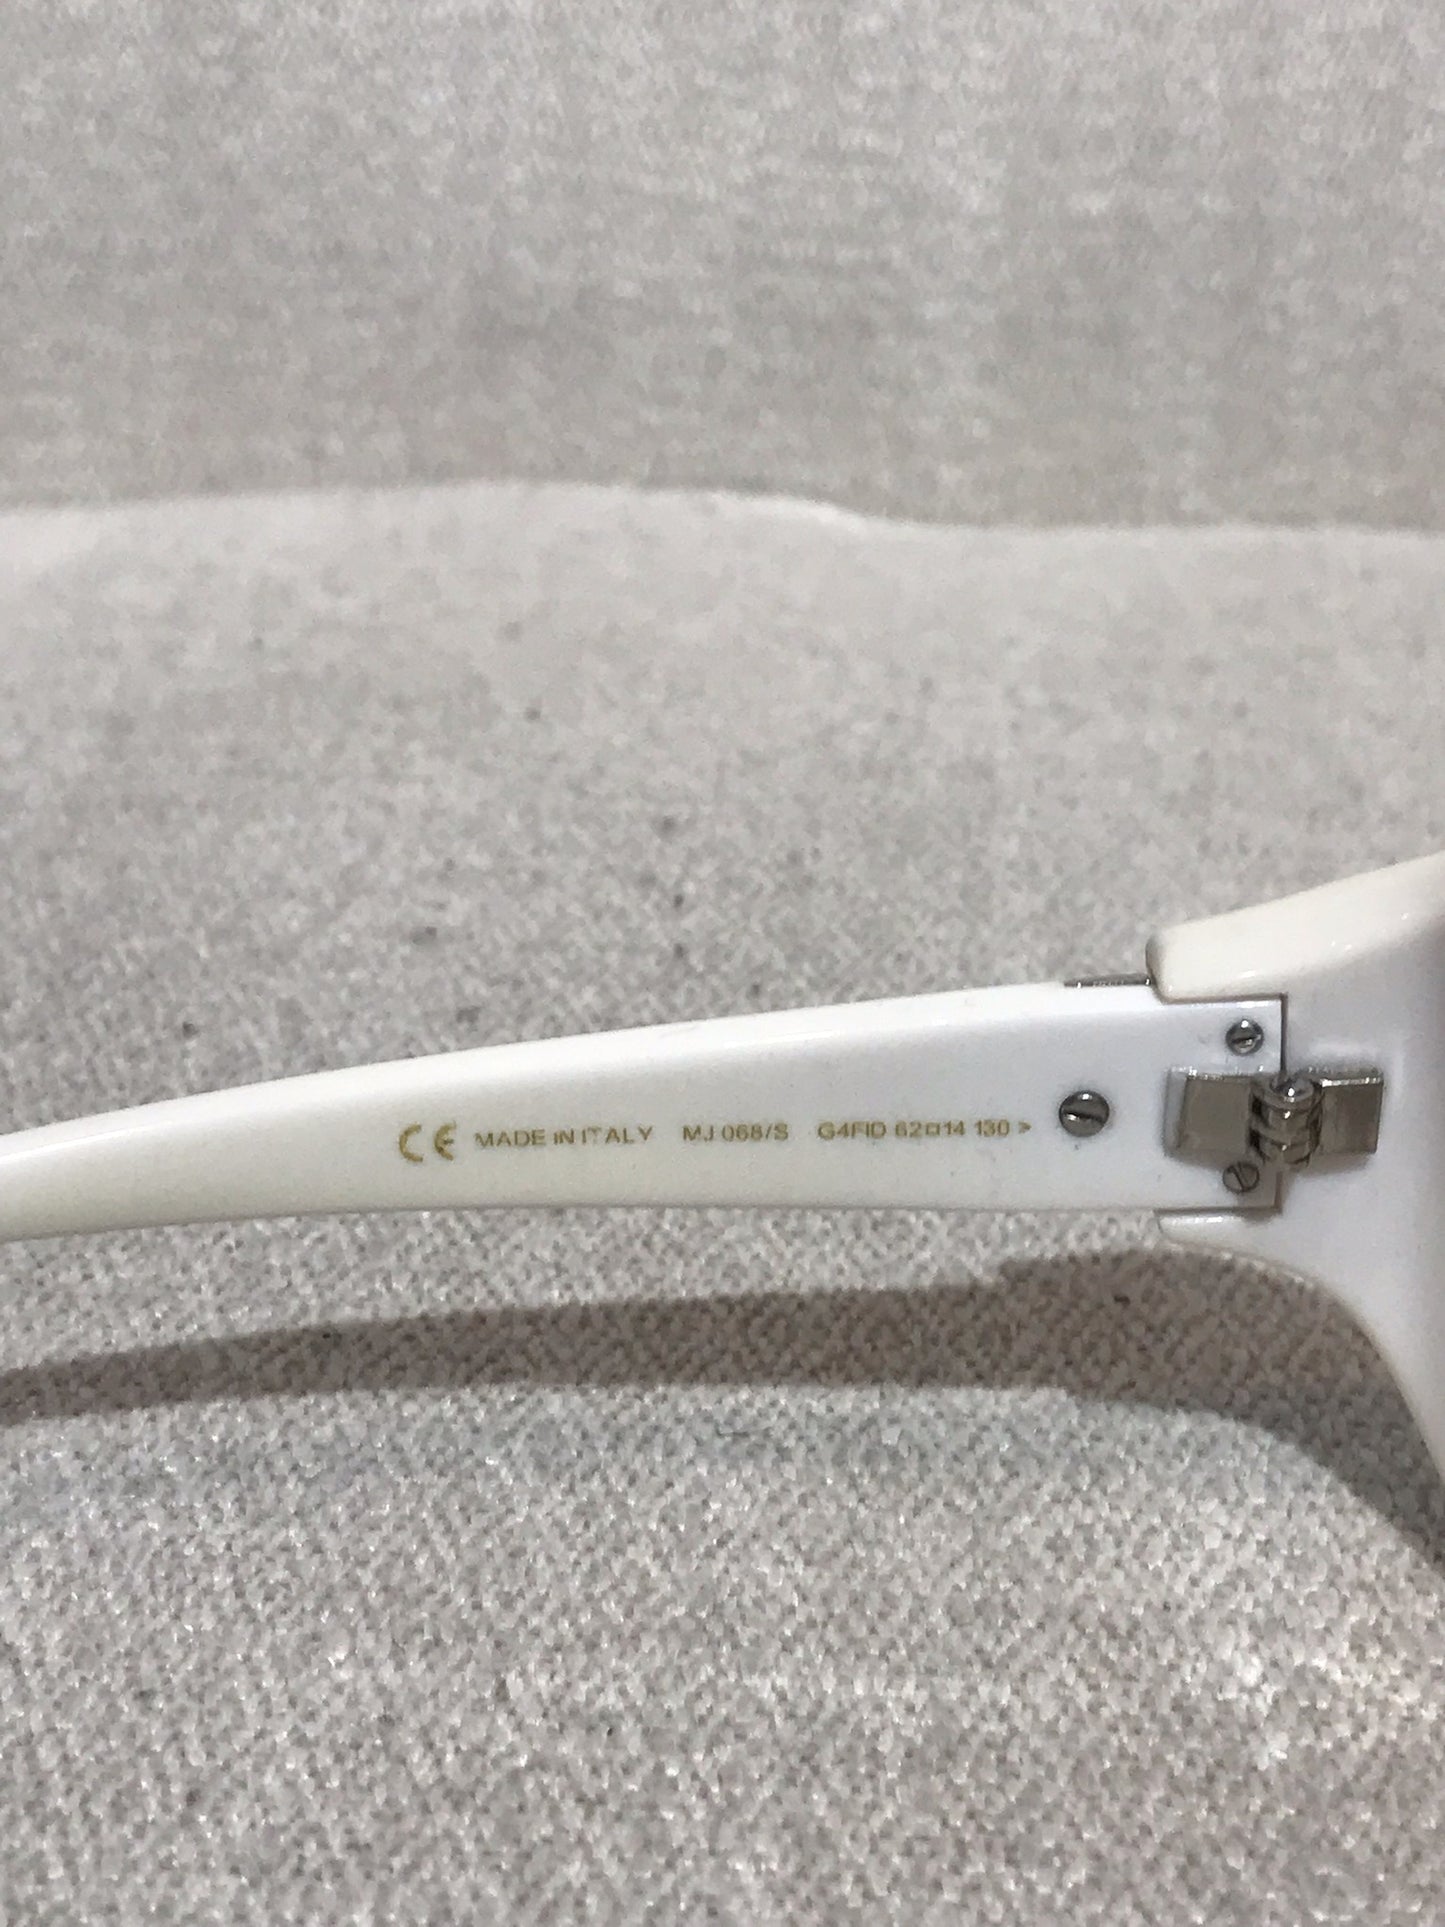 Lunettes Marc Jacobs blanches